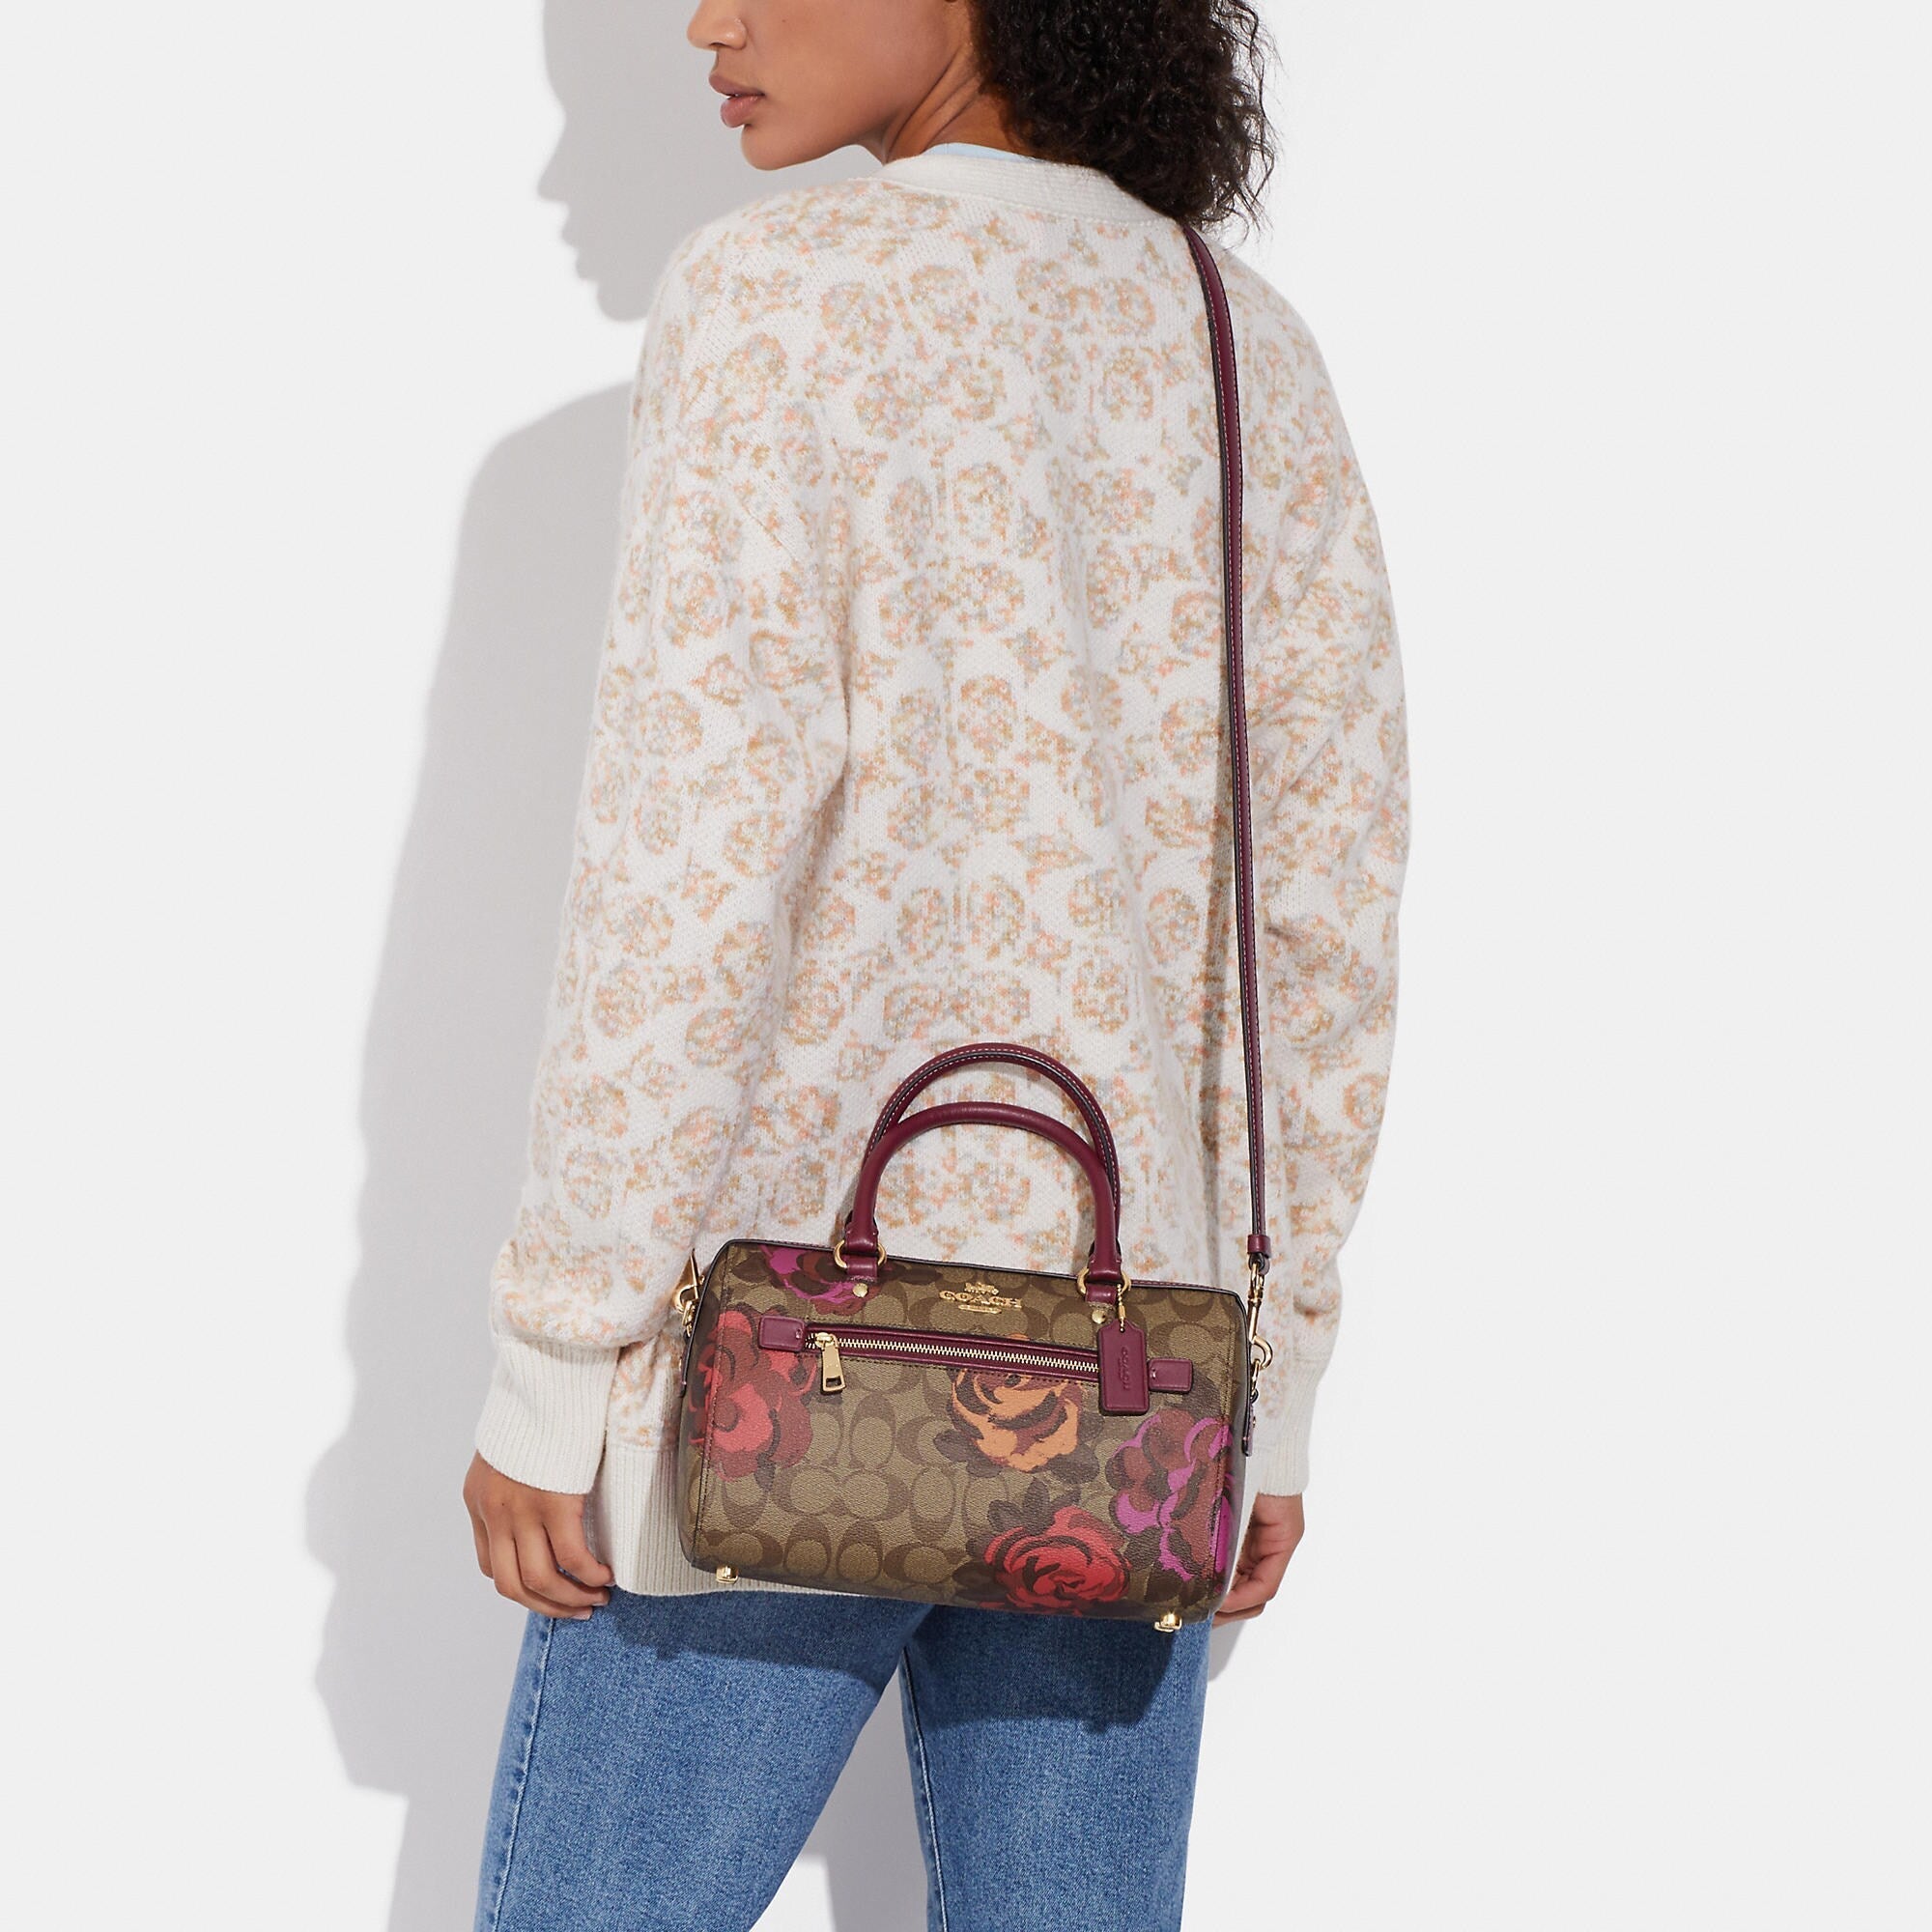 Coach Outlet Rowan Satchel In Signature Canvas With Jumbo Floral Print - TJ Outlet